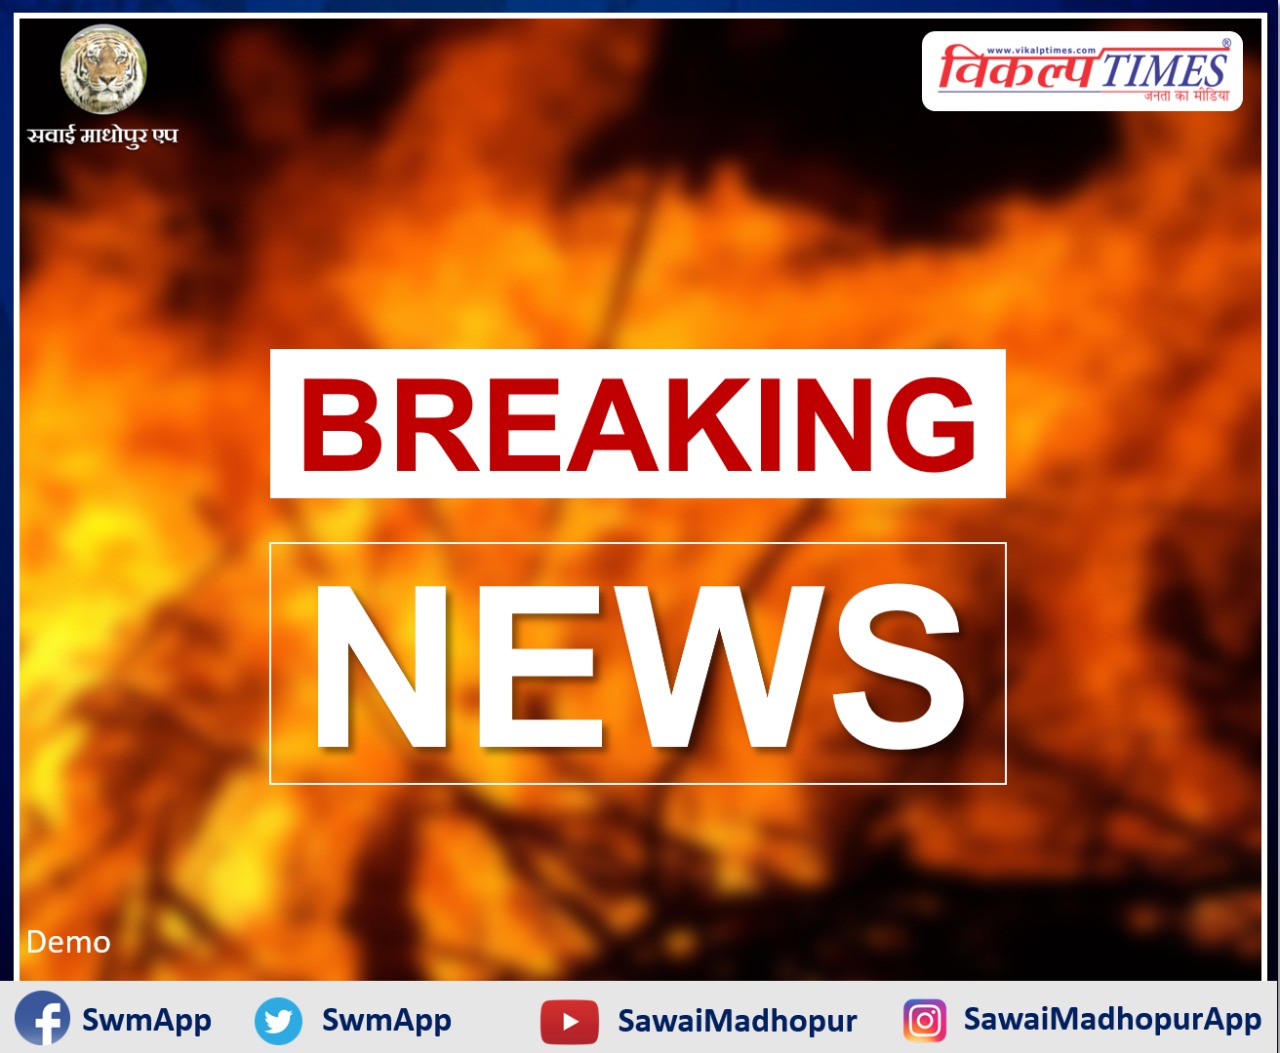 fire broke out in three thatched houses in Naugaon sawai madhopur